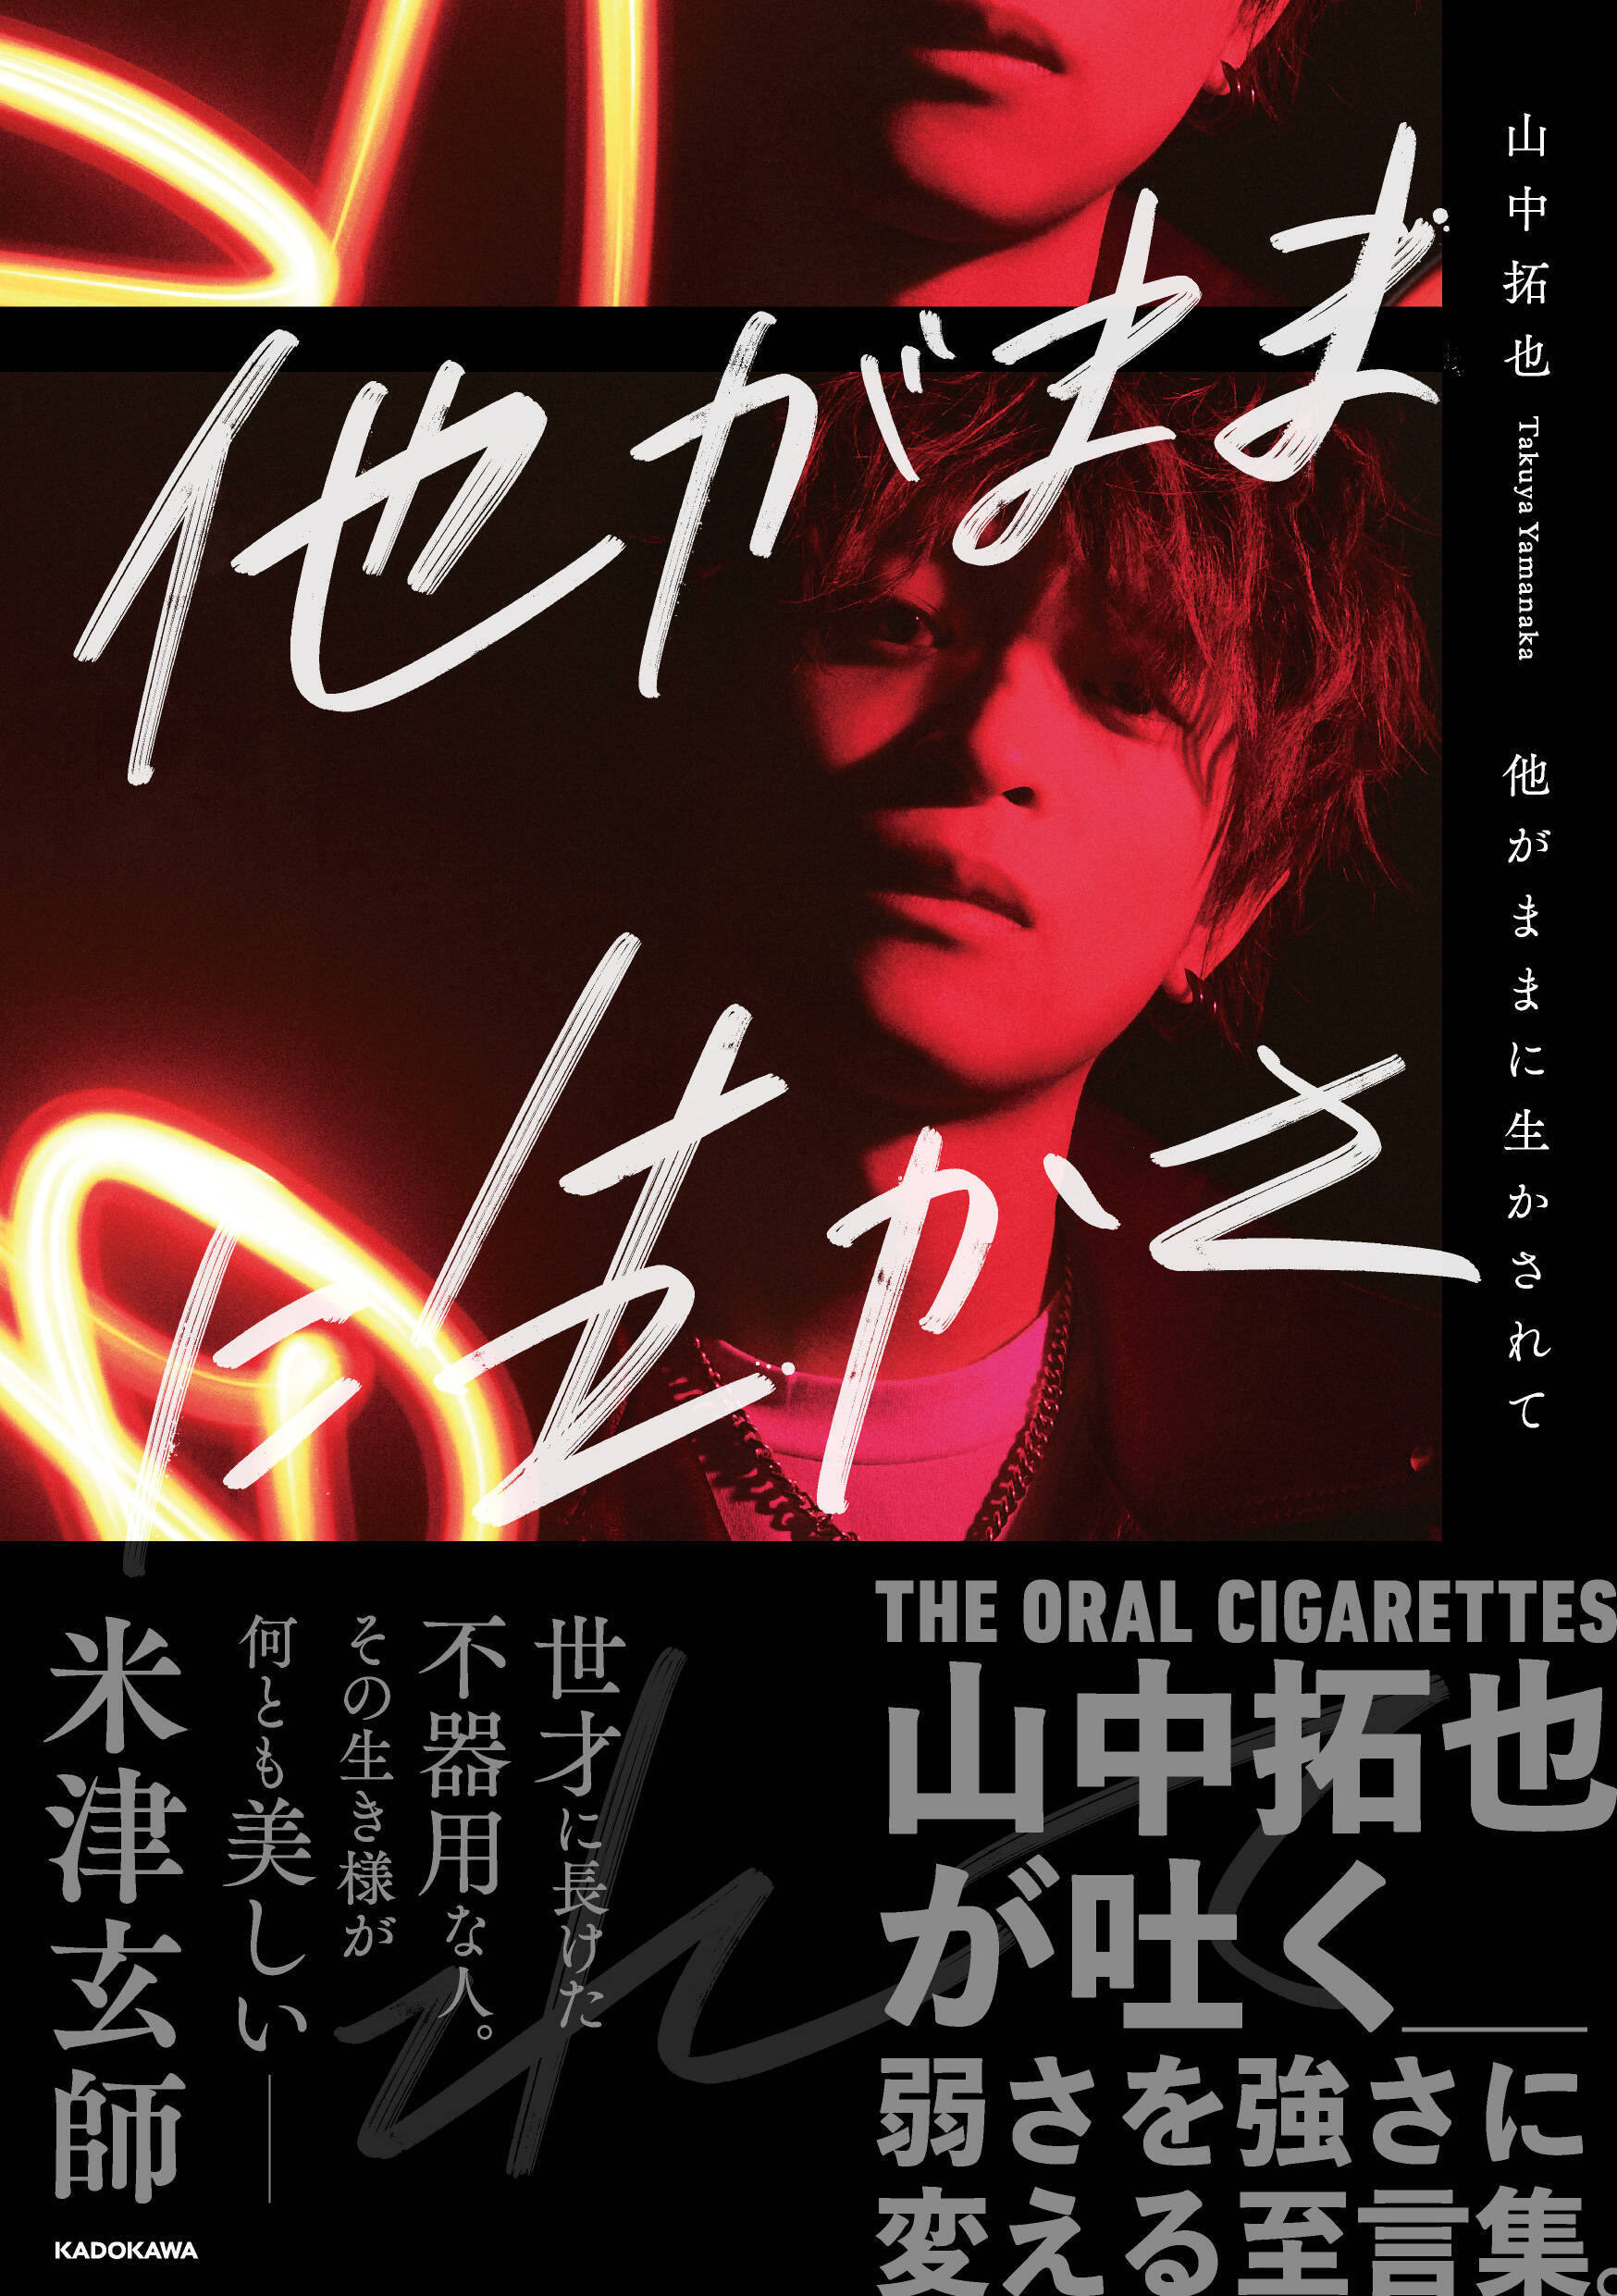 THE ORAL CIGARETTES山中拓也、自身の半生を綴った初のフォトエッセイ発売